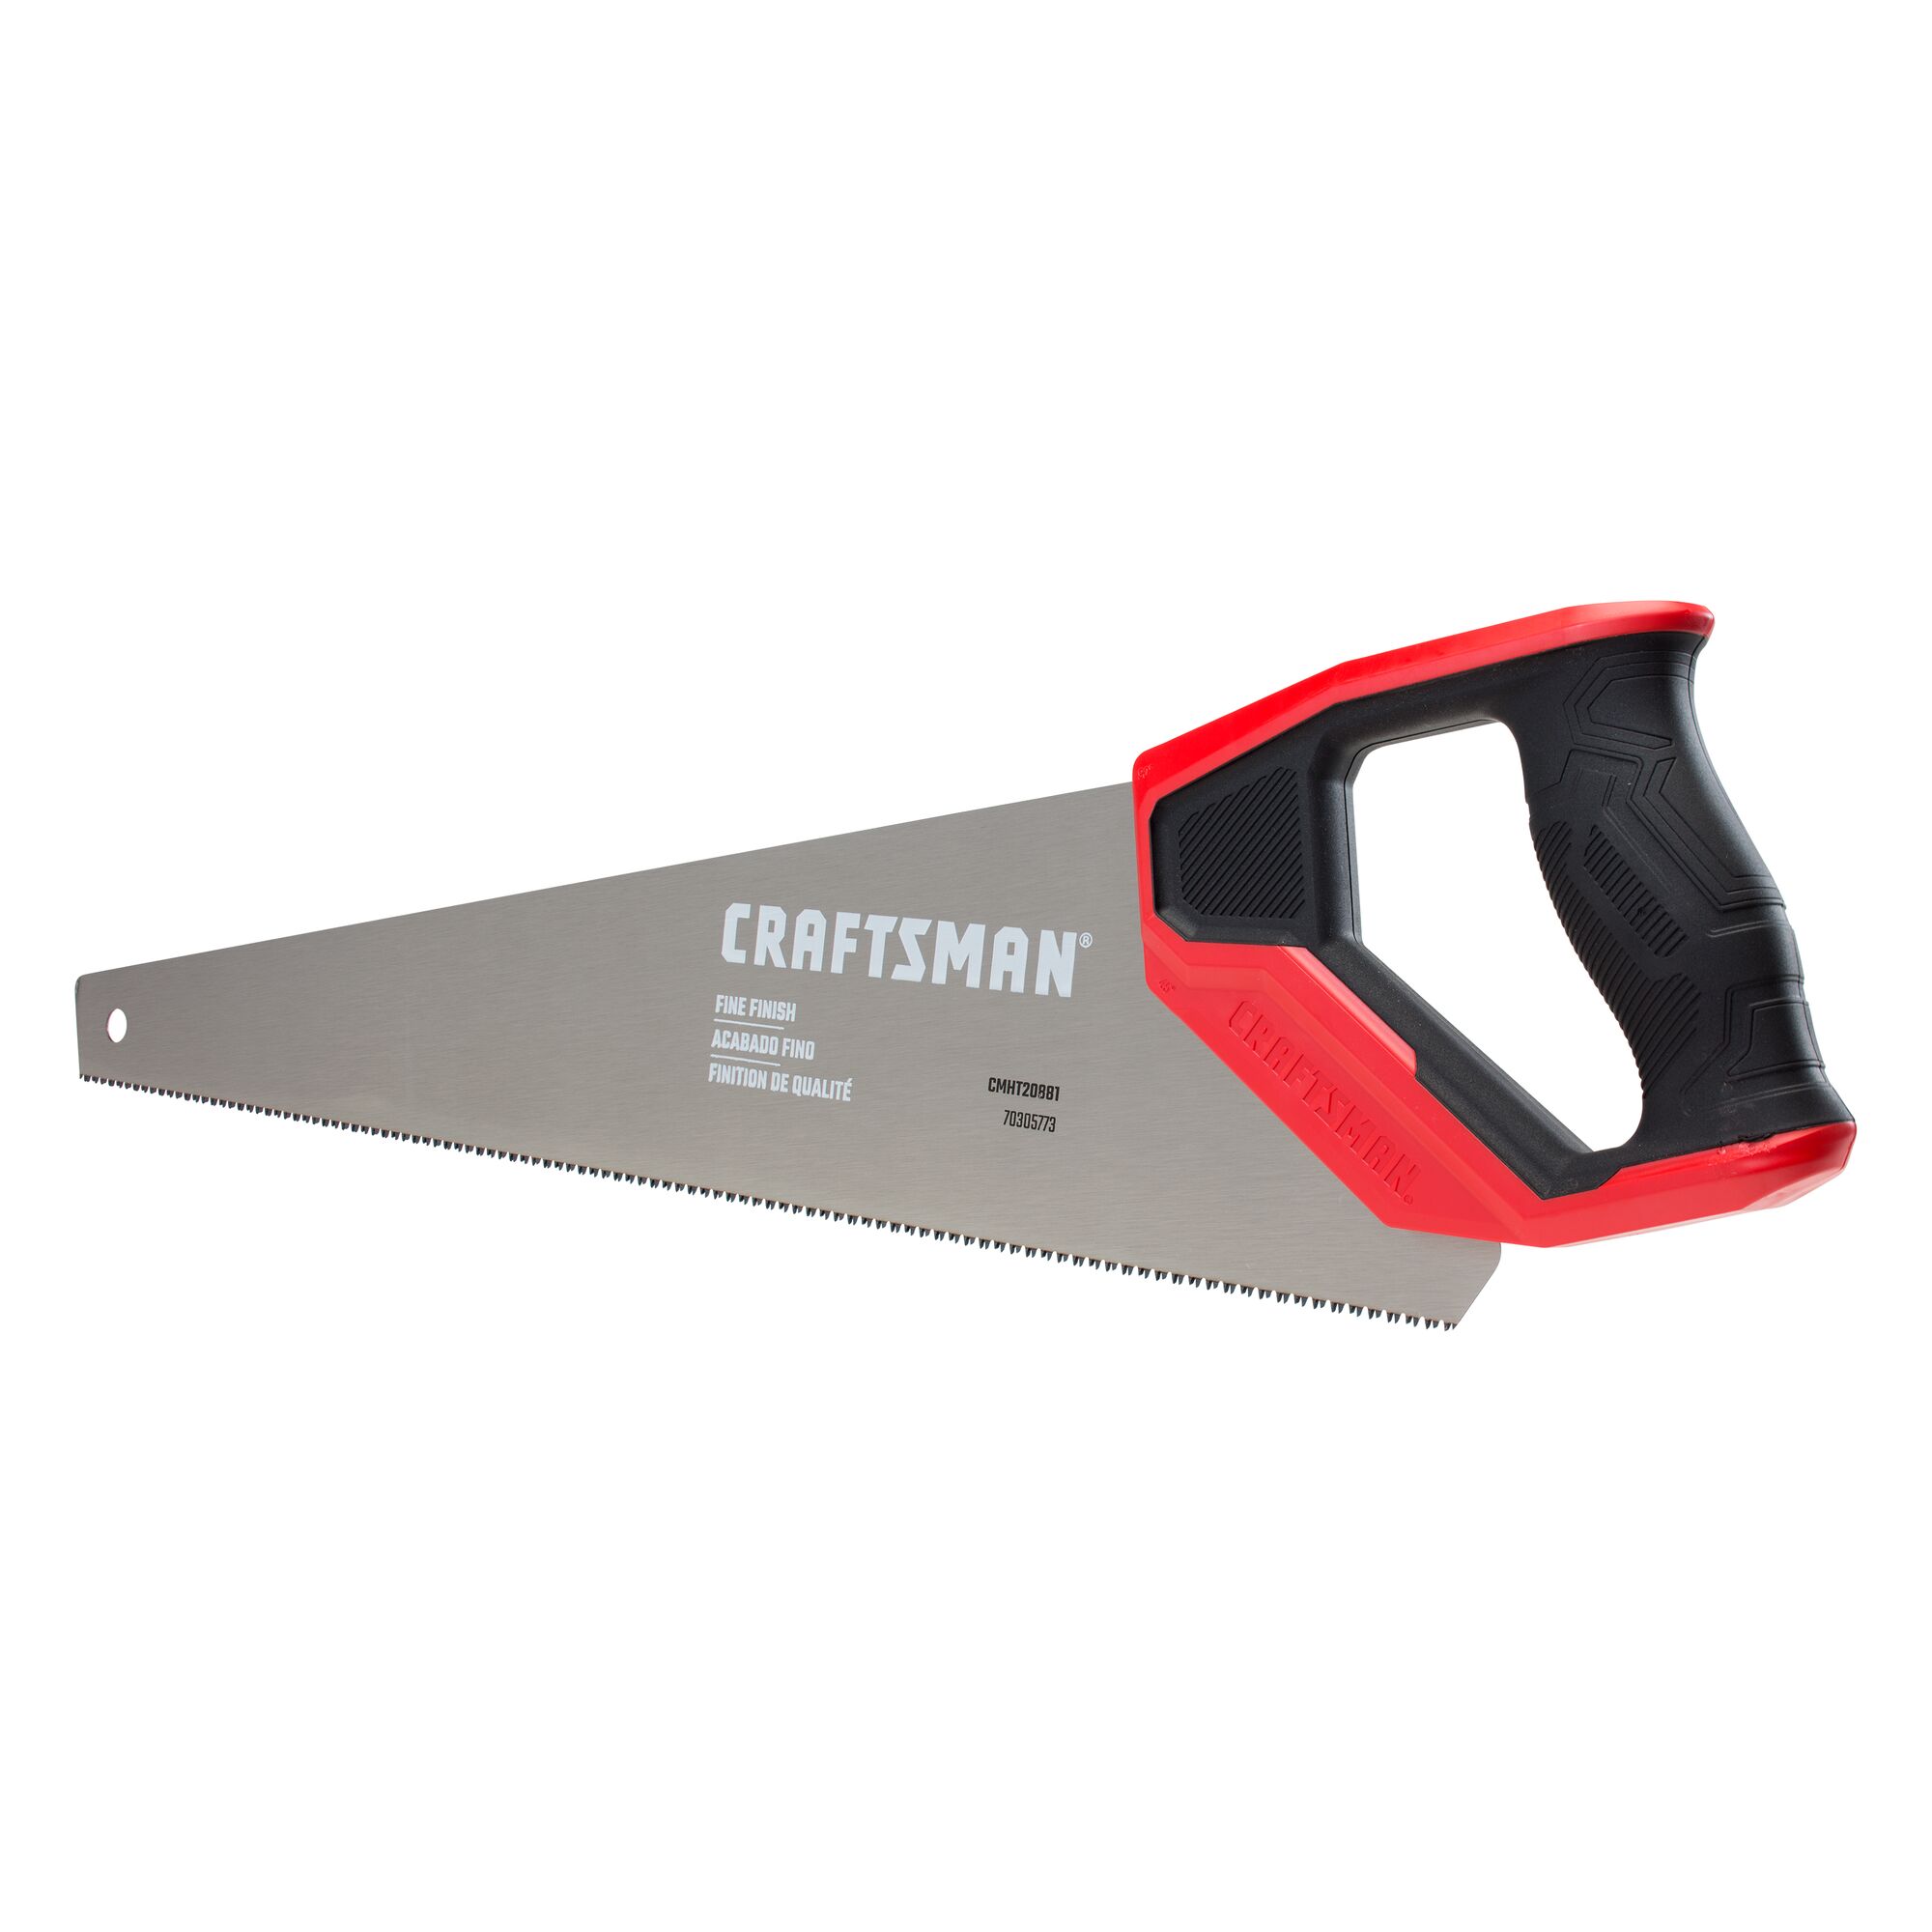 View of CRAFTSMAN Handsaw on white background